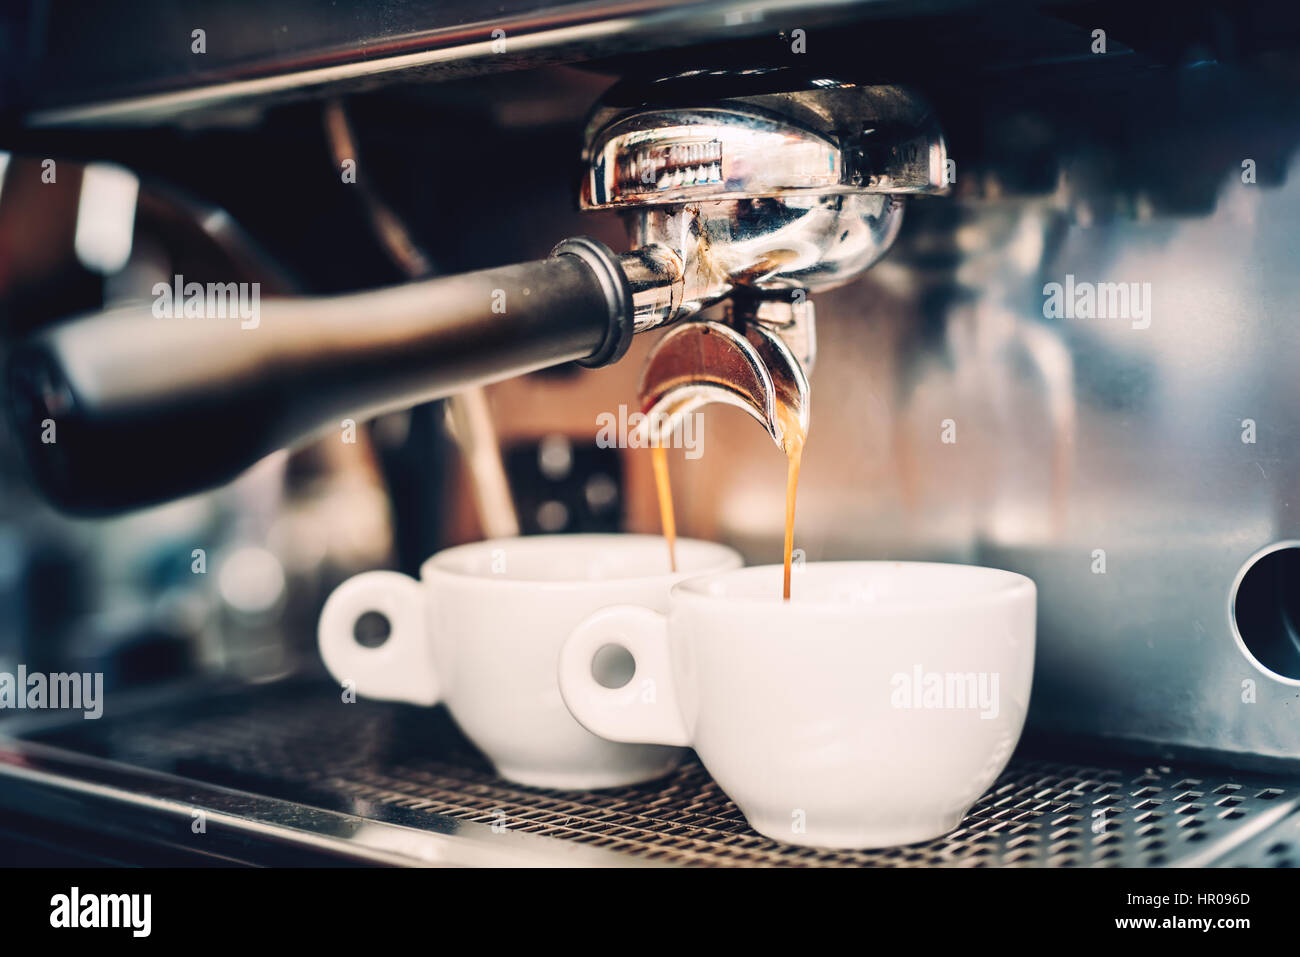 https://c8.alamy.com/comp/HR096D/proffessional-brewing-coffee-bar-details-espresso-coffee-pouring-from-HR096D.jpg